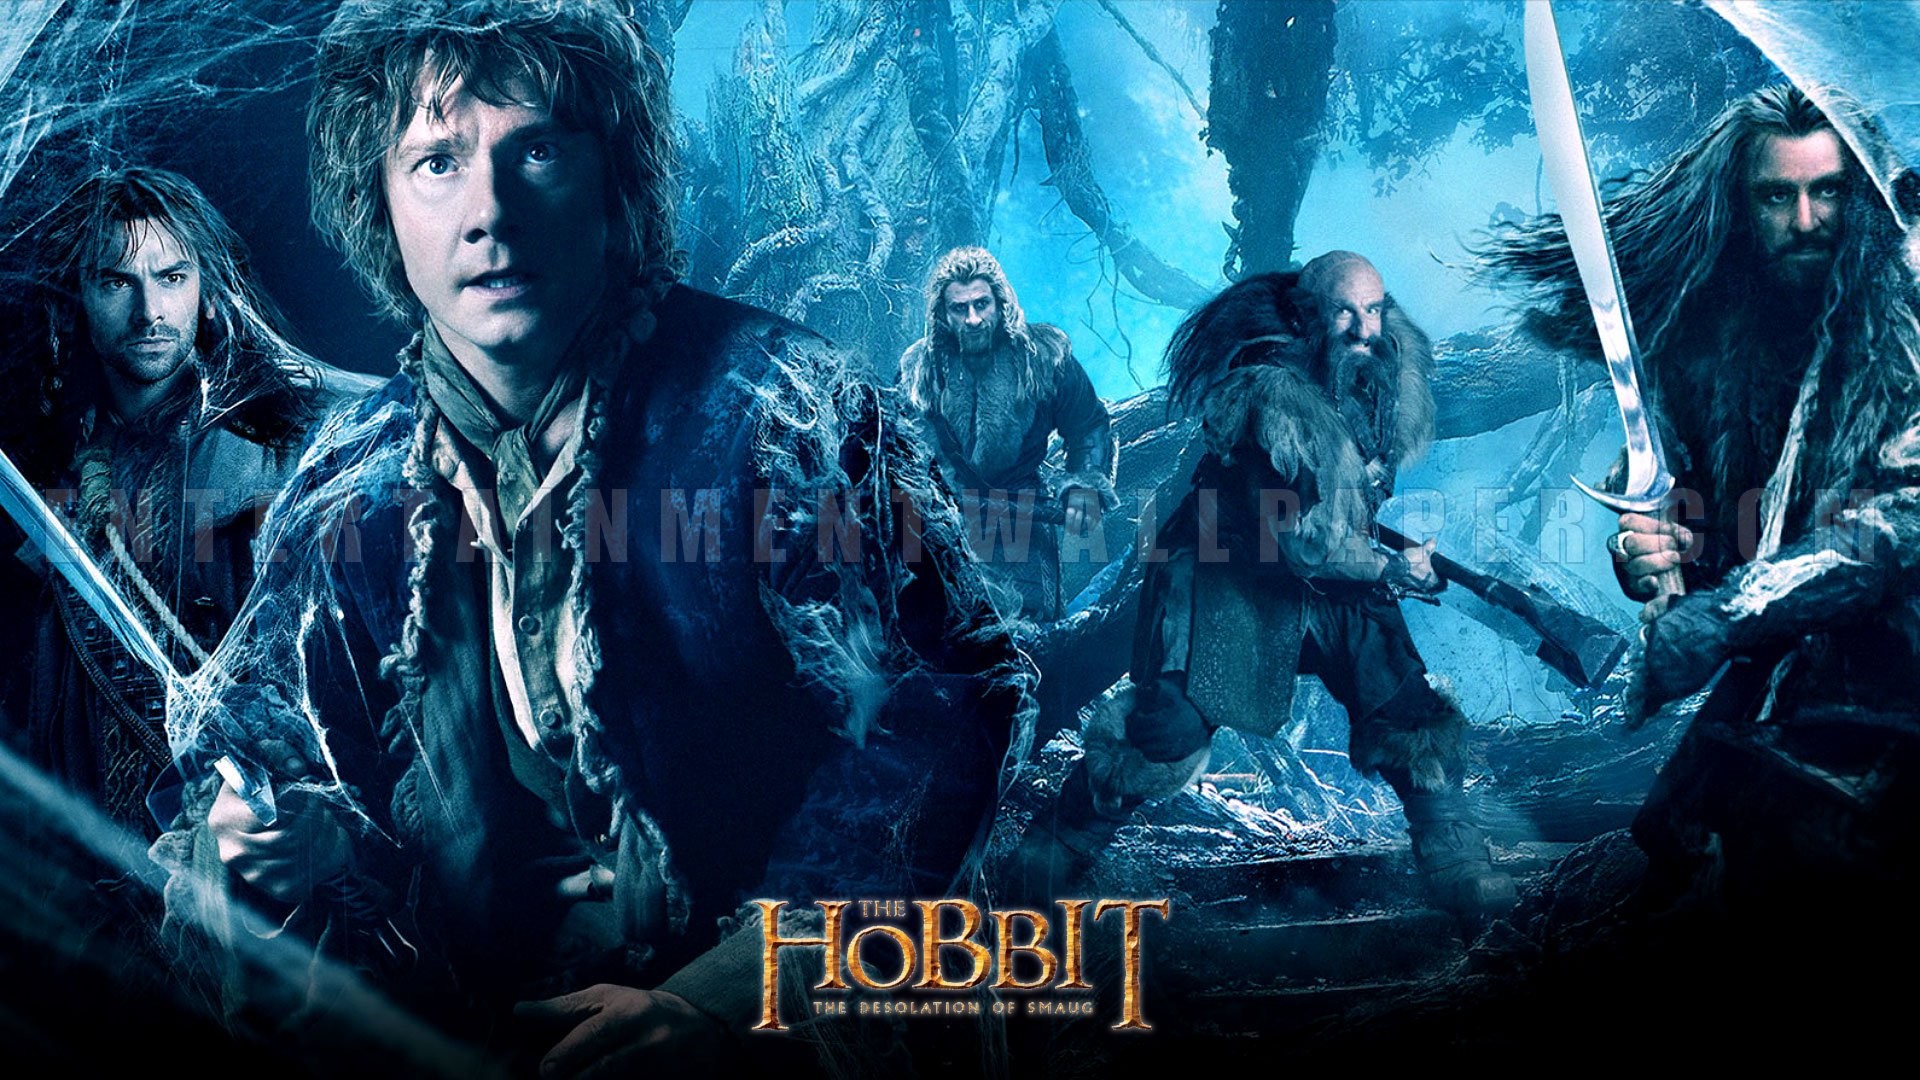 1920x1080 The Hobbit: The Desolation of Smaug Wallpaper - Original size, download now.